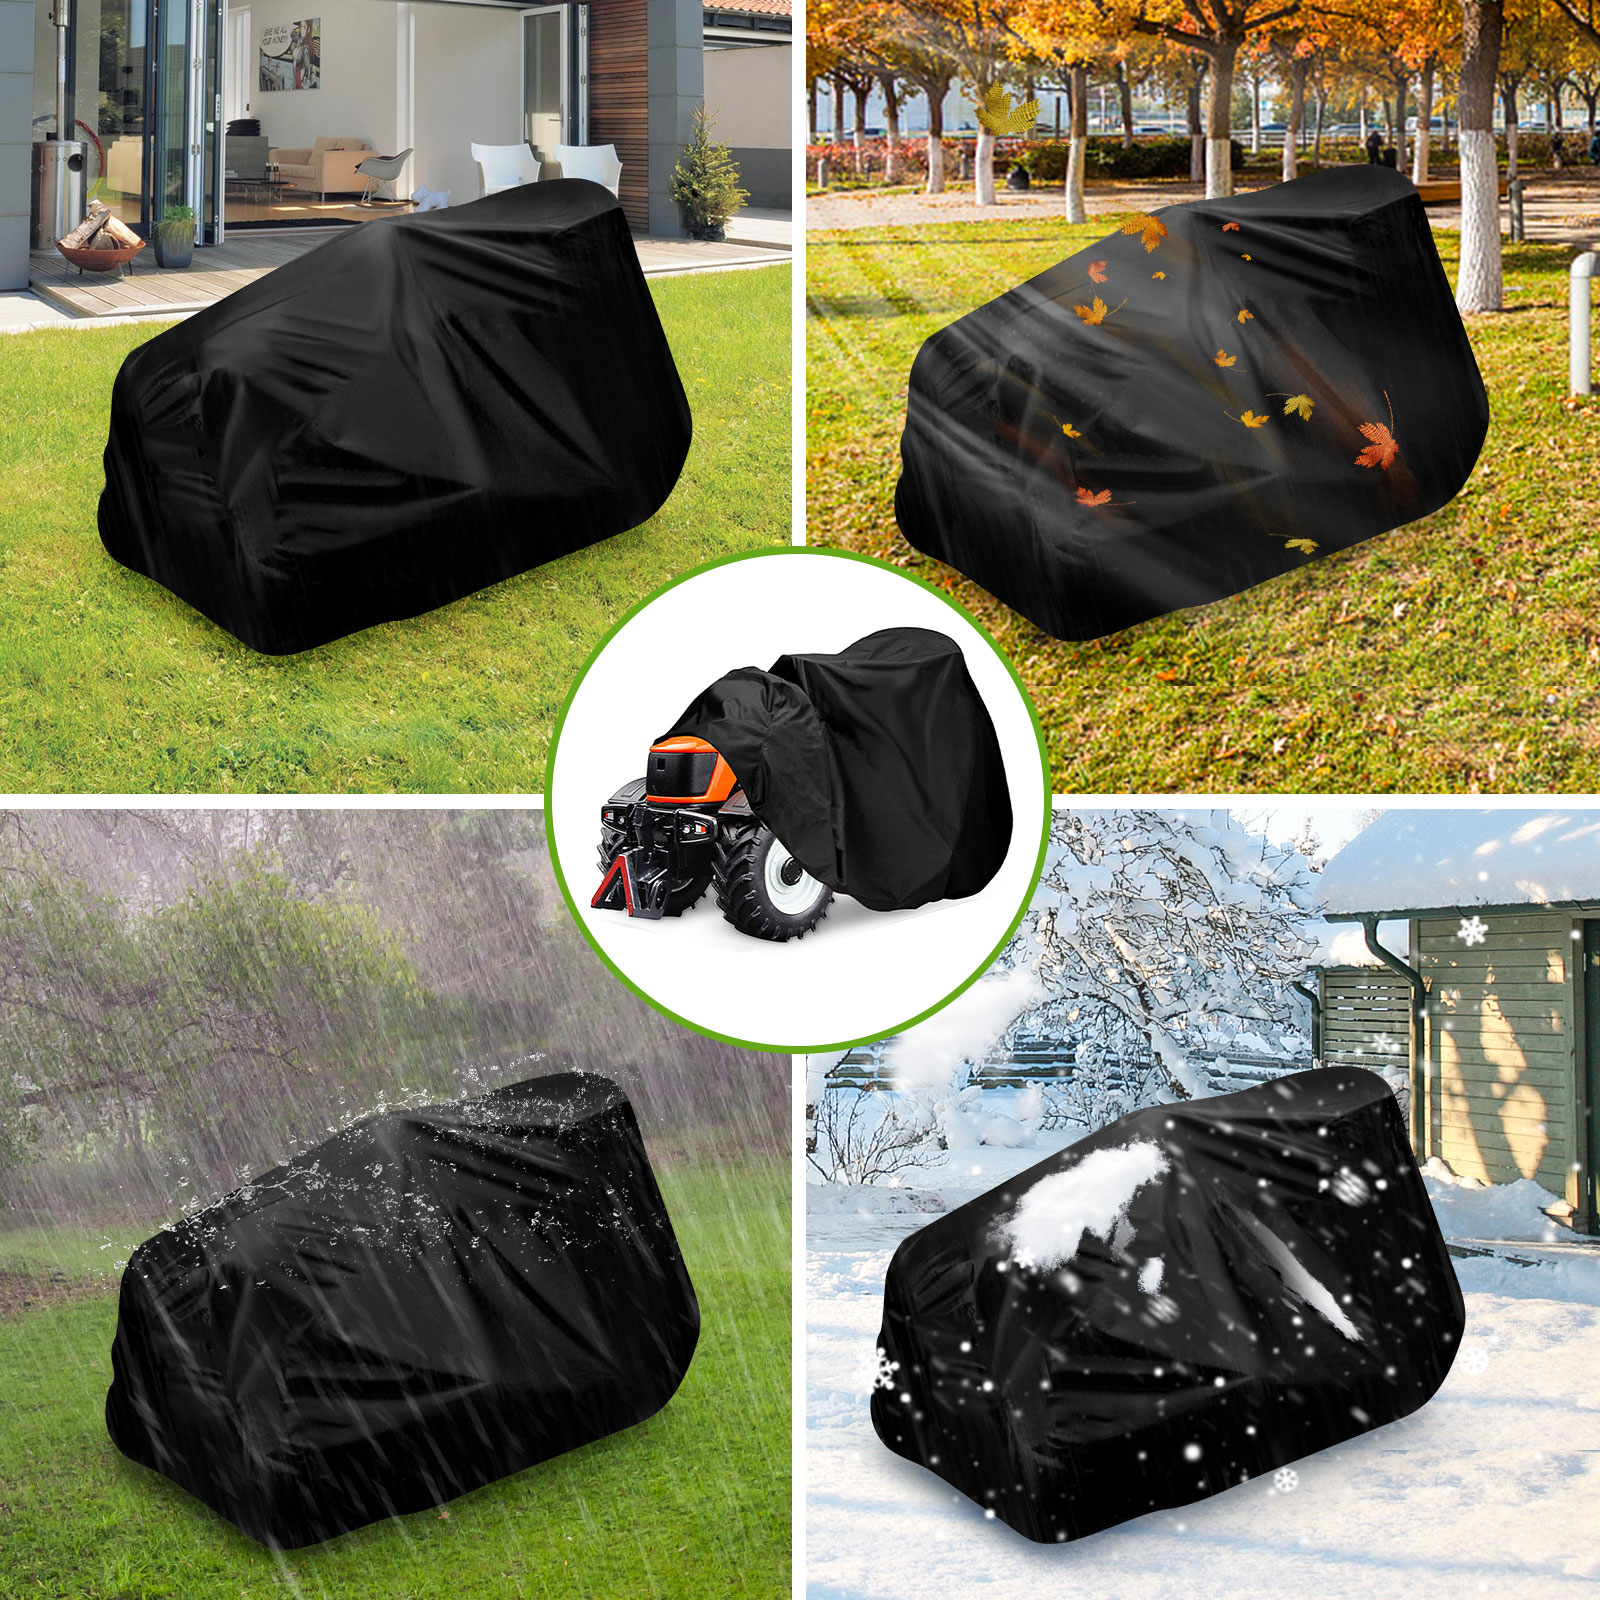 NASUM-72quot-Ride-On-Lawn-Mower-Cover-Heavy-Duty-Oxford-Cloth-Dust-Rain-UV-Protection-1901898-6